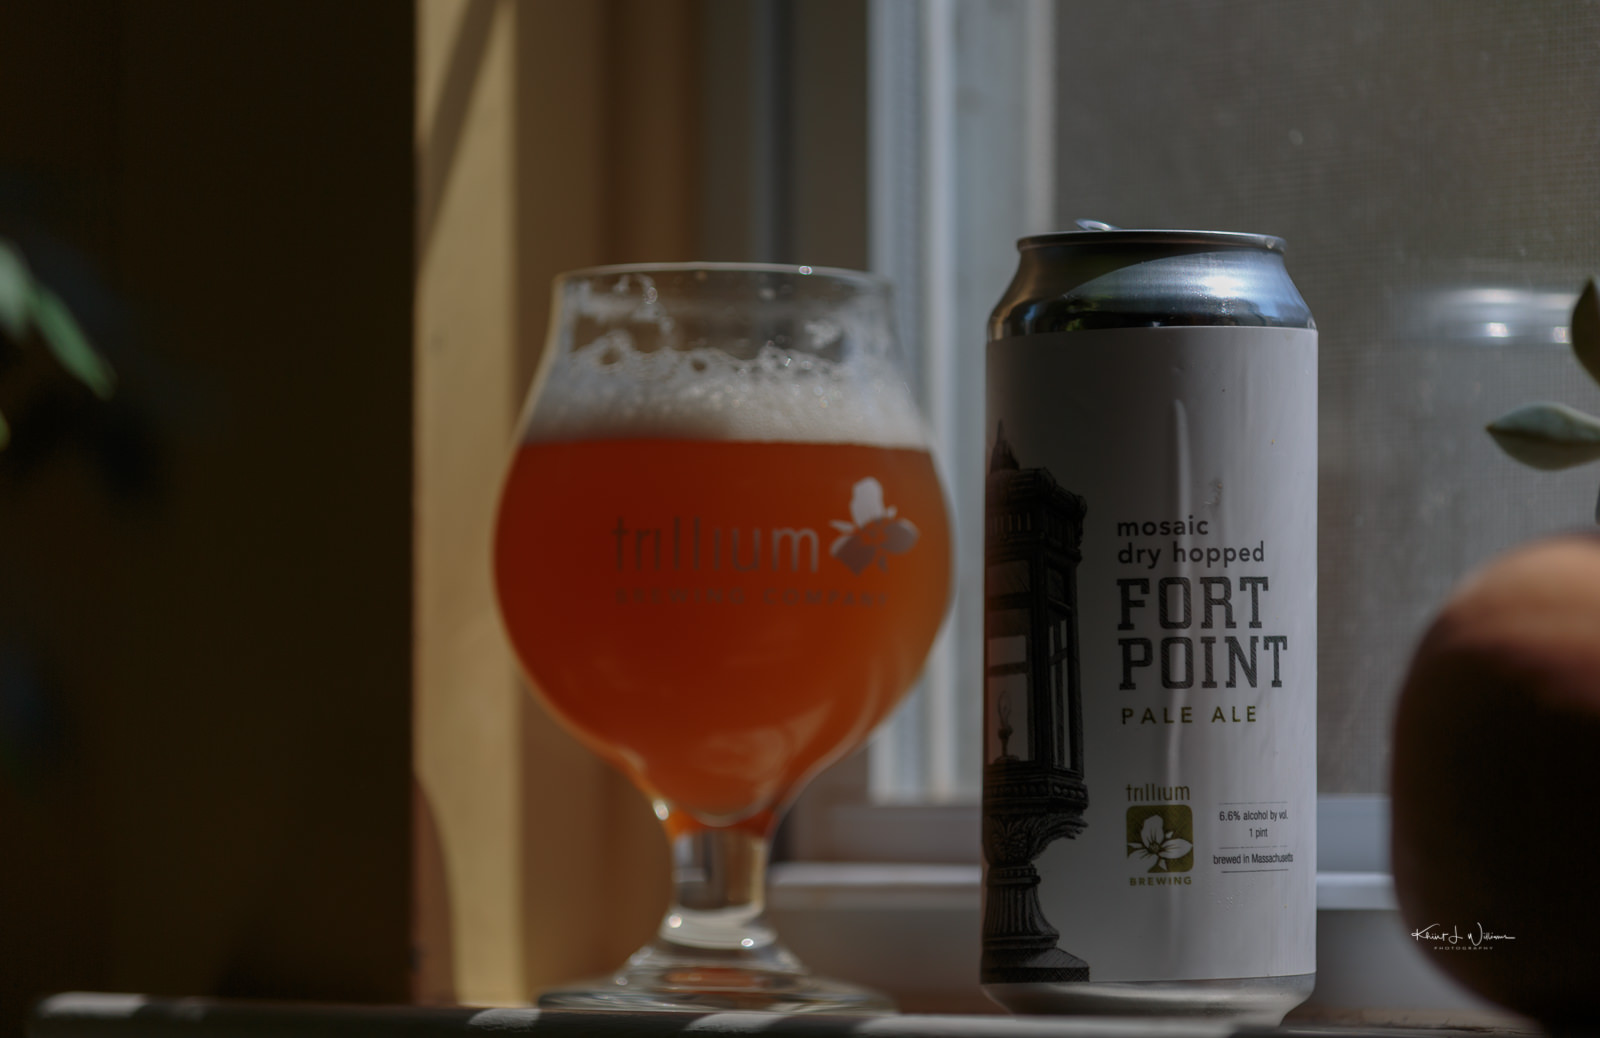 Trillium Brewing Company's Mosaic Dry Hopped Fort Point Pale Ale